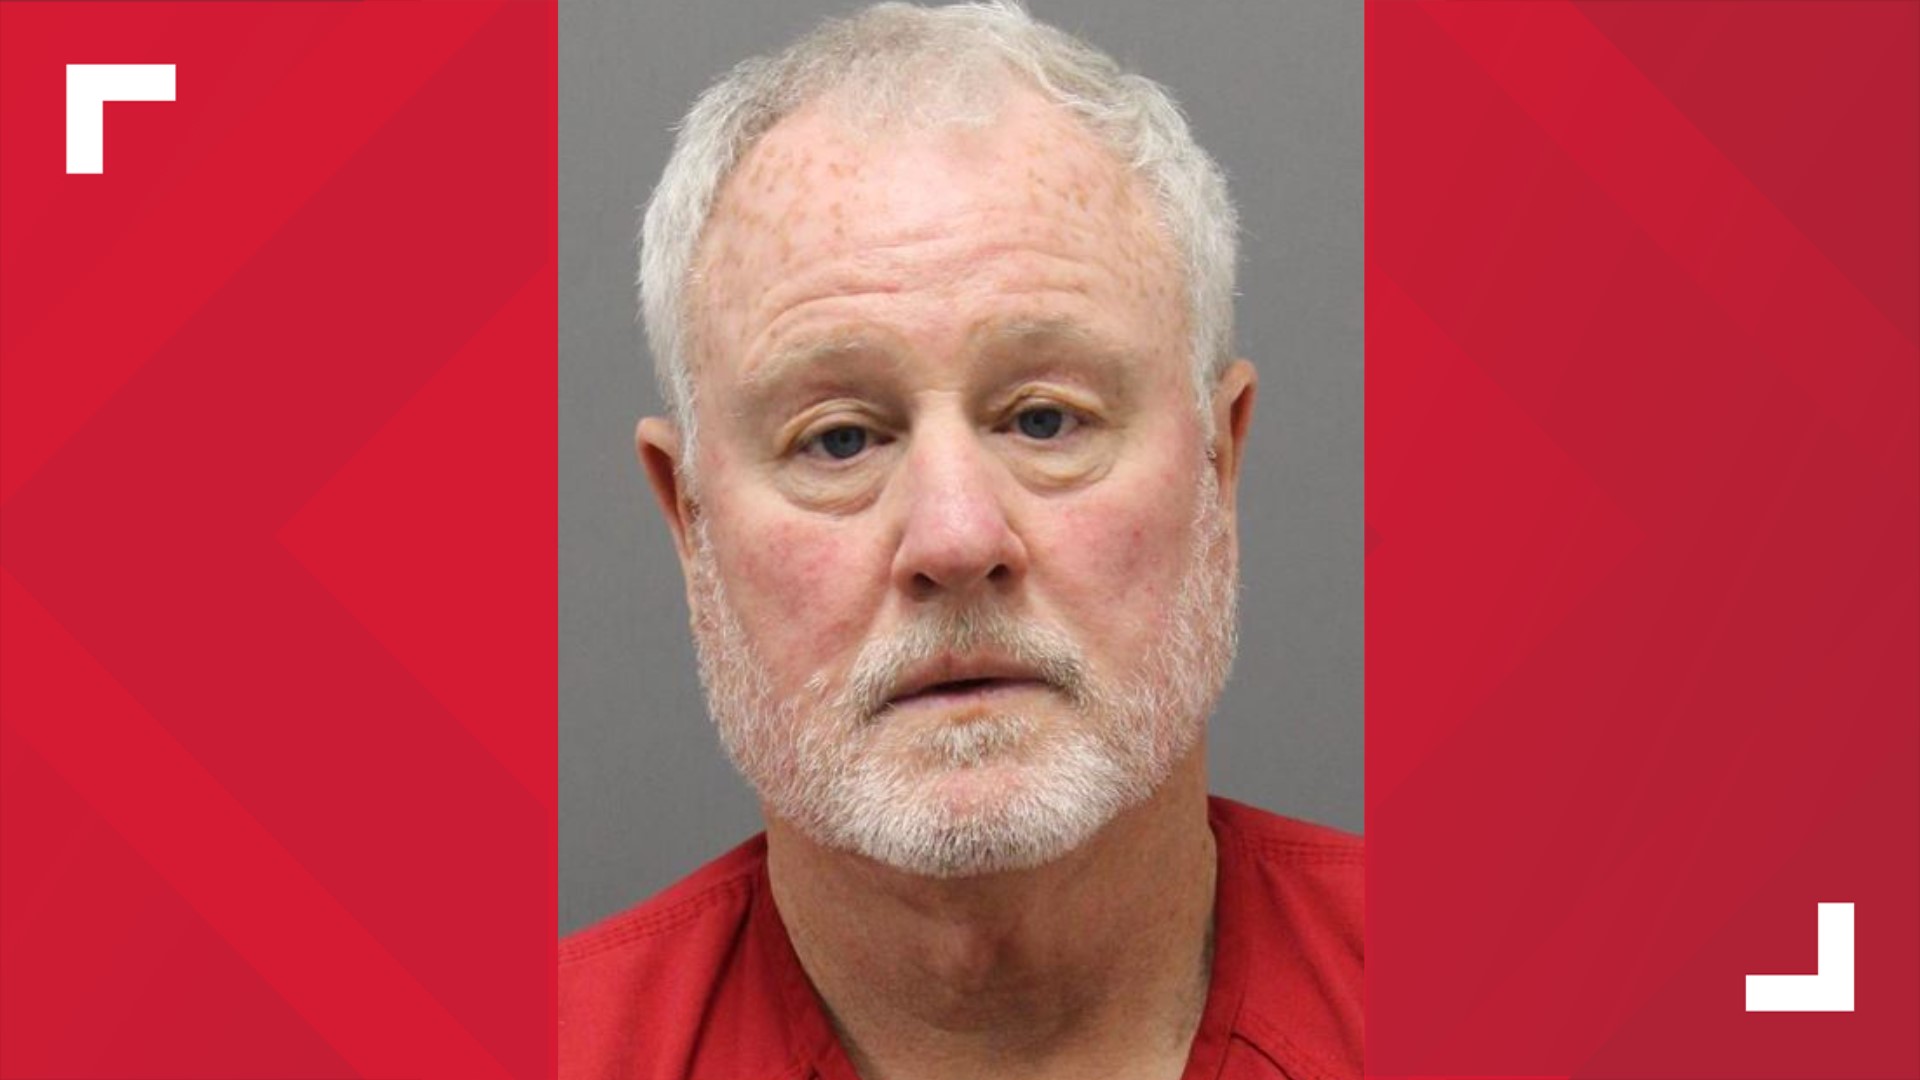 The Loudoun County Sheriff's Office have arrested a man for assault after he allegedly inappropriately touched two children at the Claude Moore Park swimming pool.